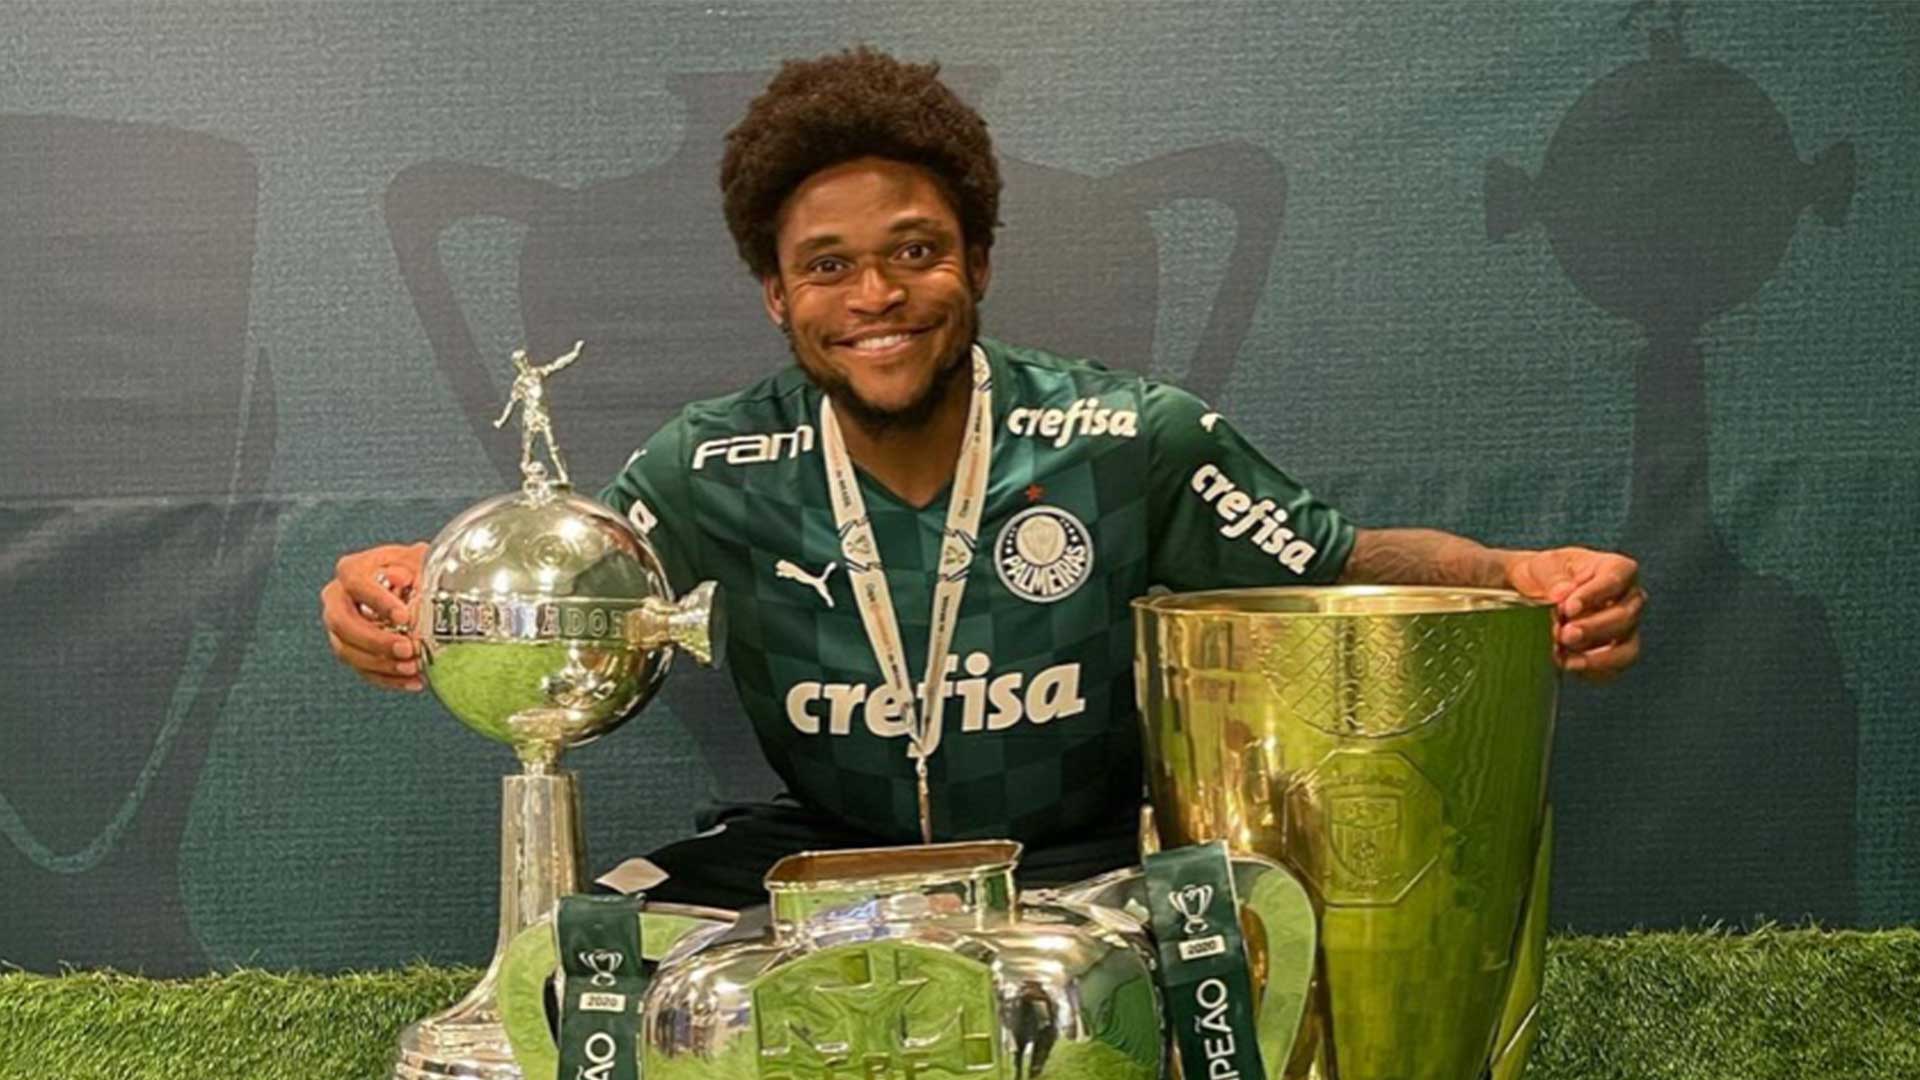 Luiz Adriano poses with several trophies and a medal